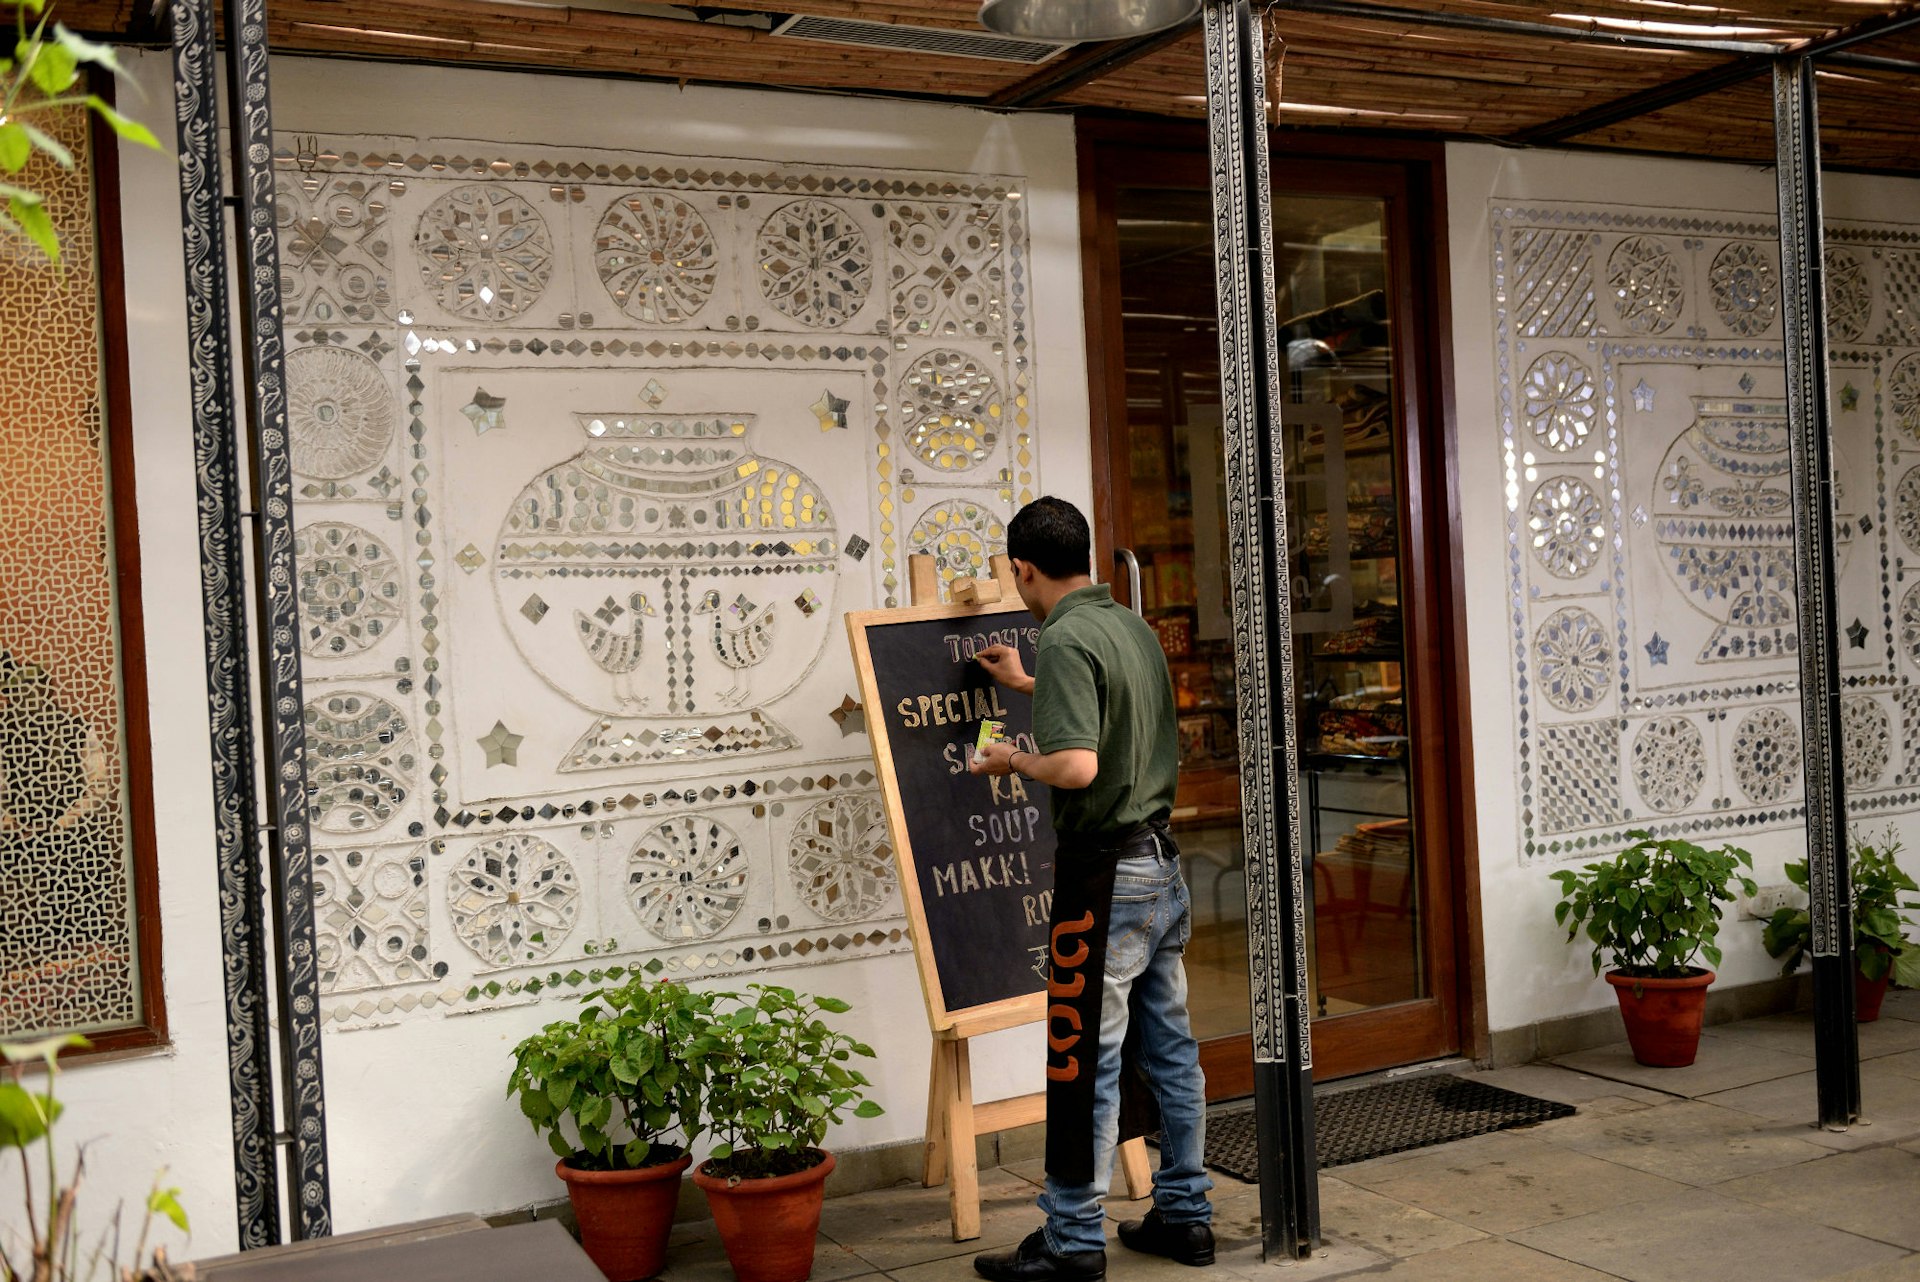 Chalking up the specials board at Cafe Lota © Mint / Contributor / Getty Images